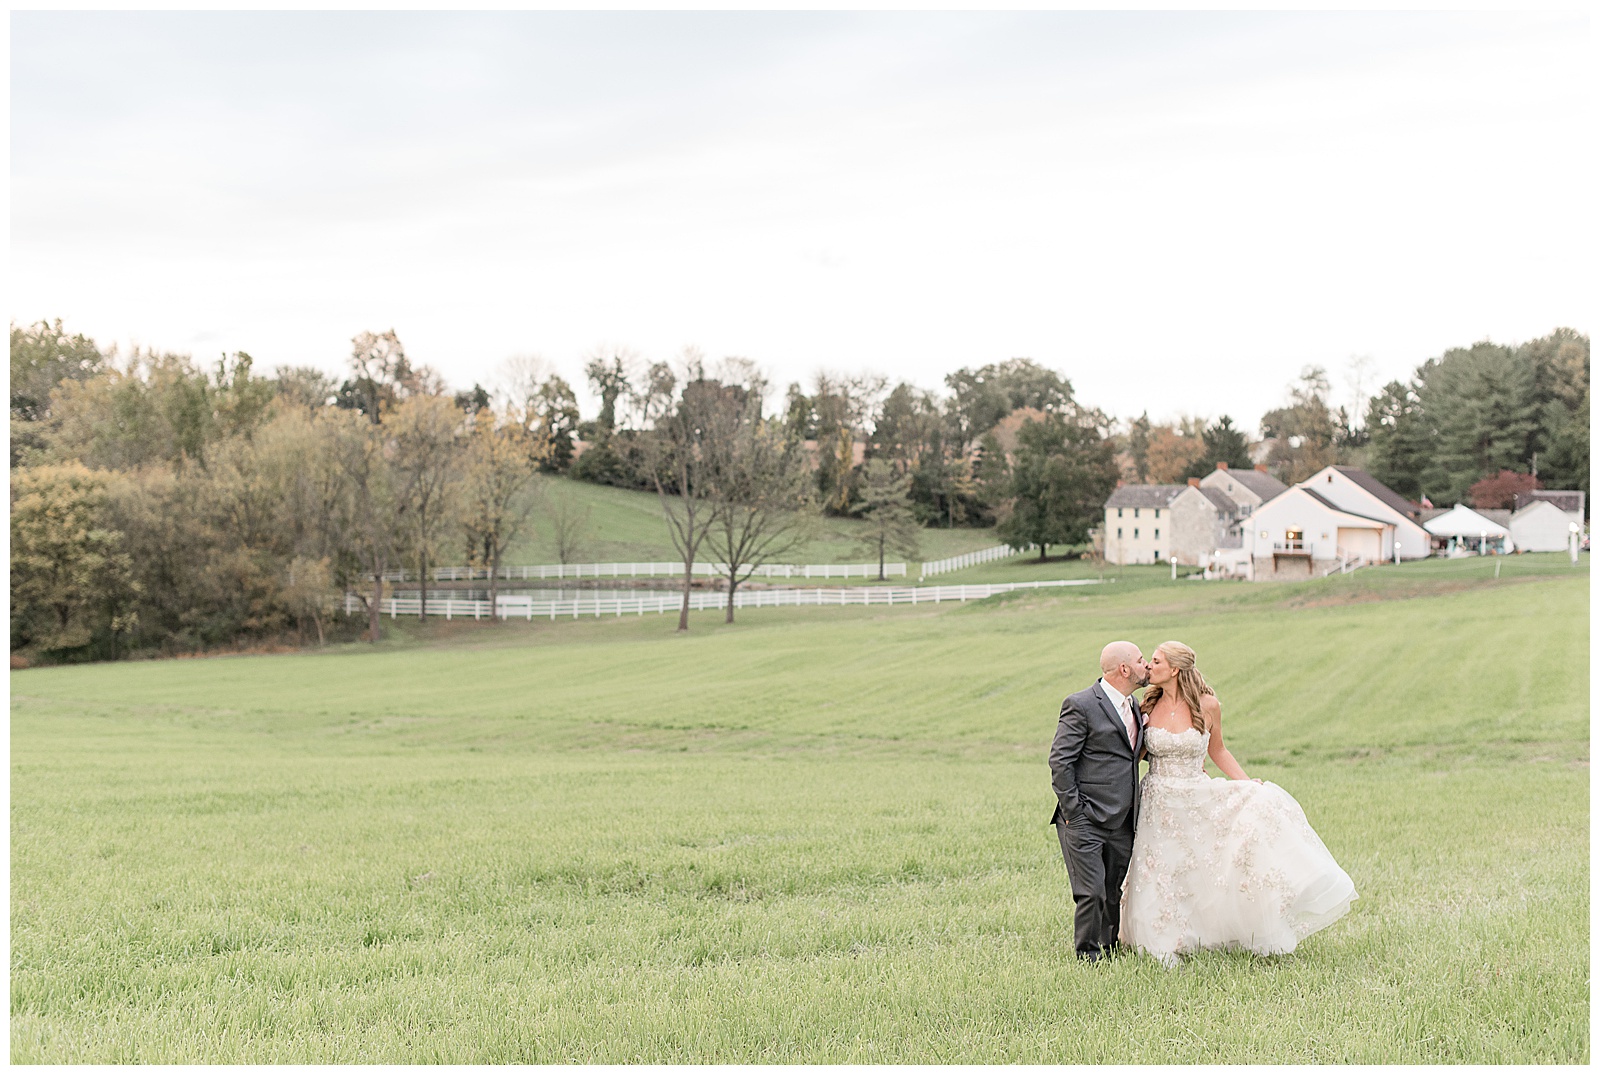 couple kissing in meadow with white fence and barn and trees in background at bluestone estate